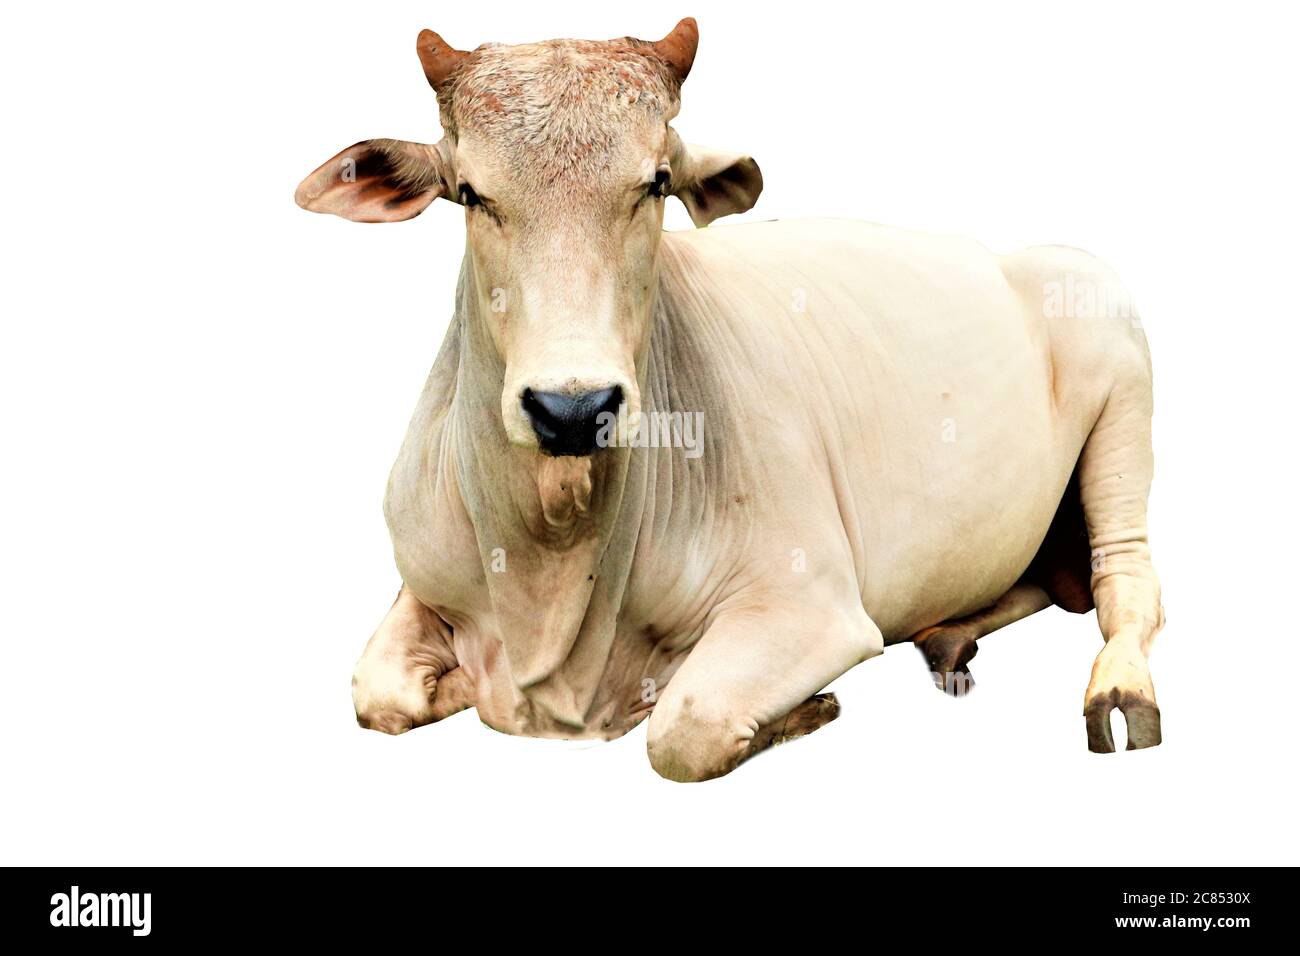 Cows Standing on a white background Stock Photo